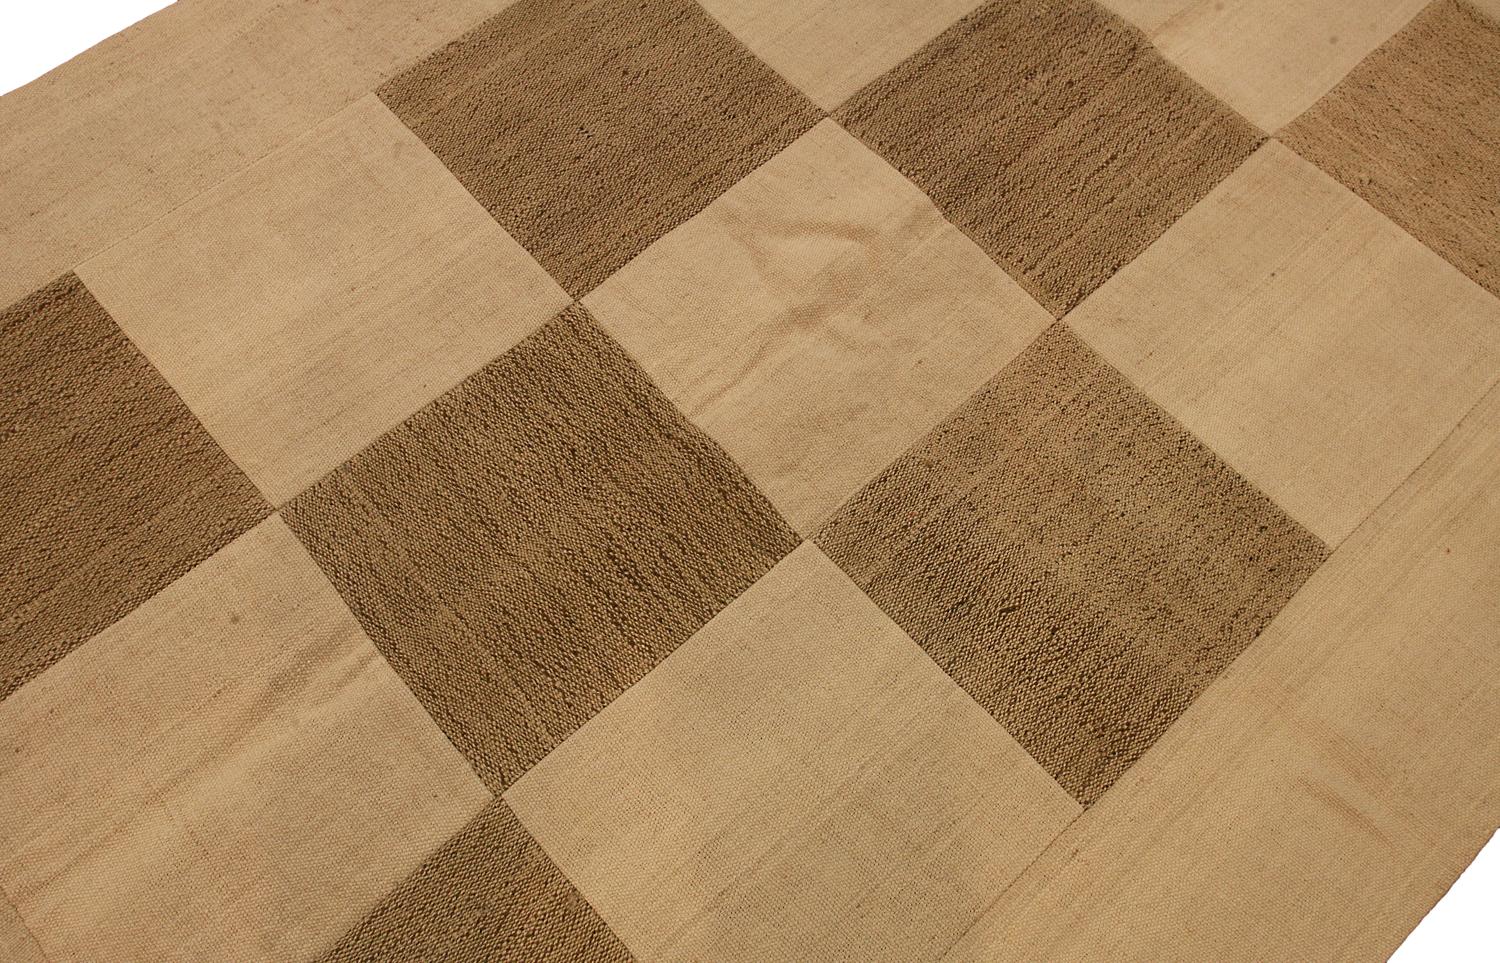 The field with open design of checkered of ivory and beige panels. This rug was made with panels sawn together in a rug suze. Full pile, backed with canvas. In general very good usable condition. Elegant and very good furnishing piece. The